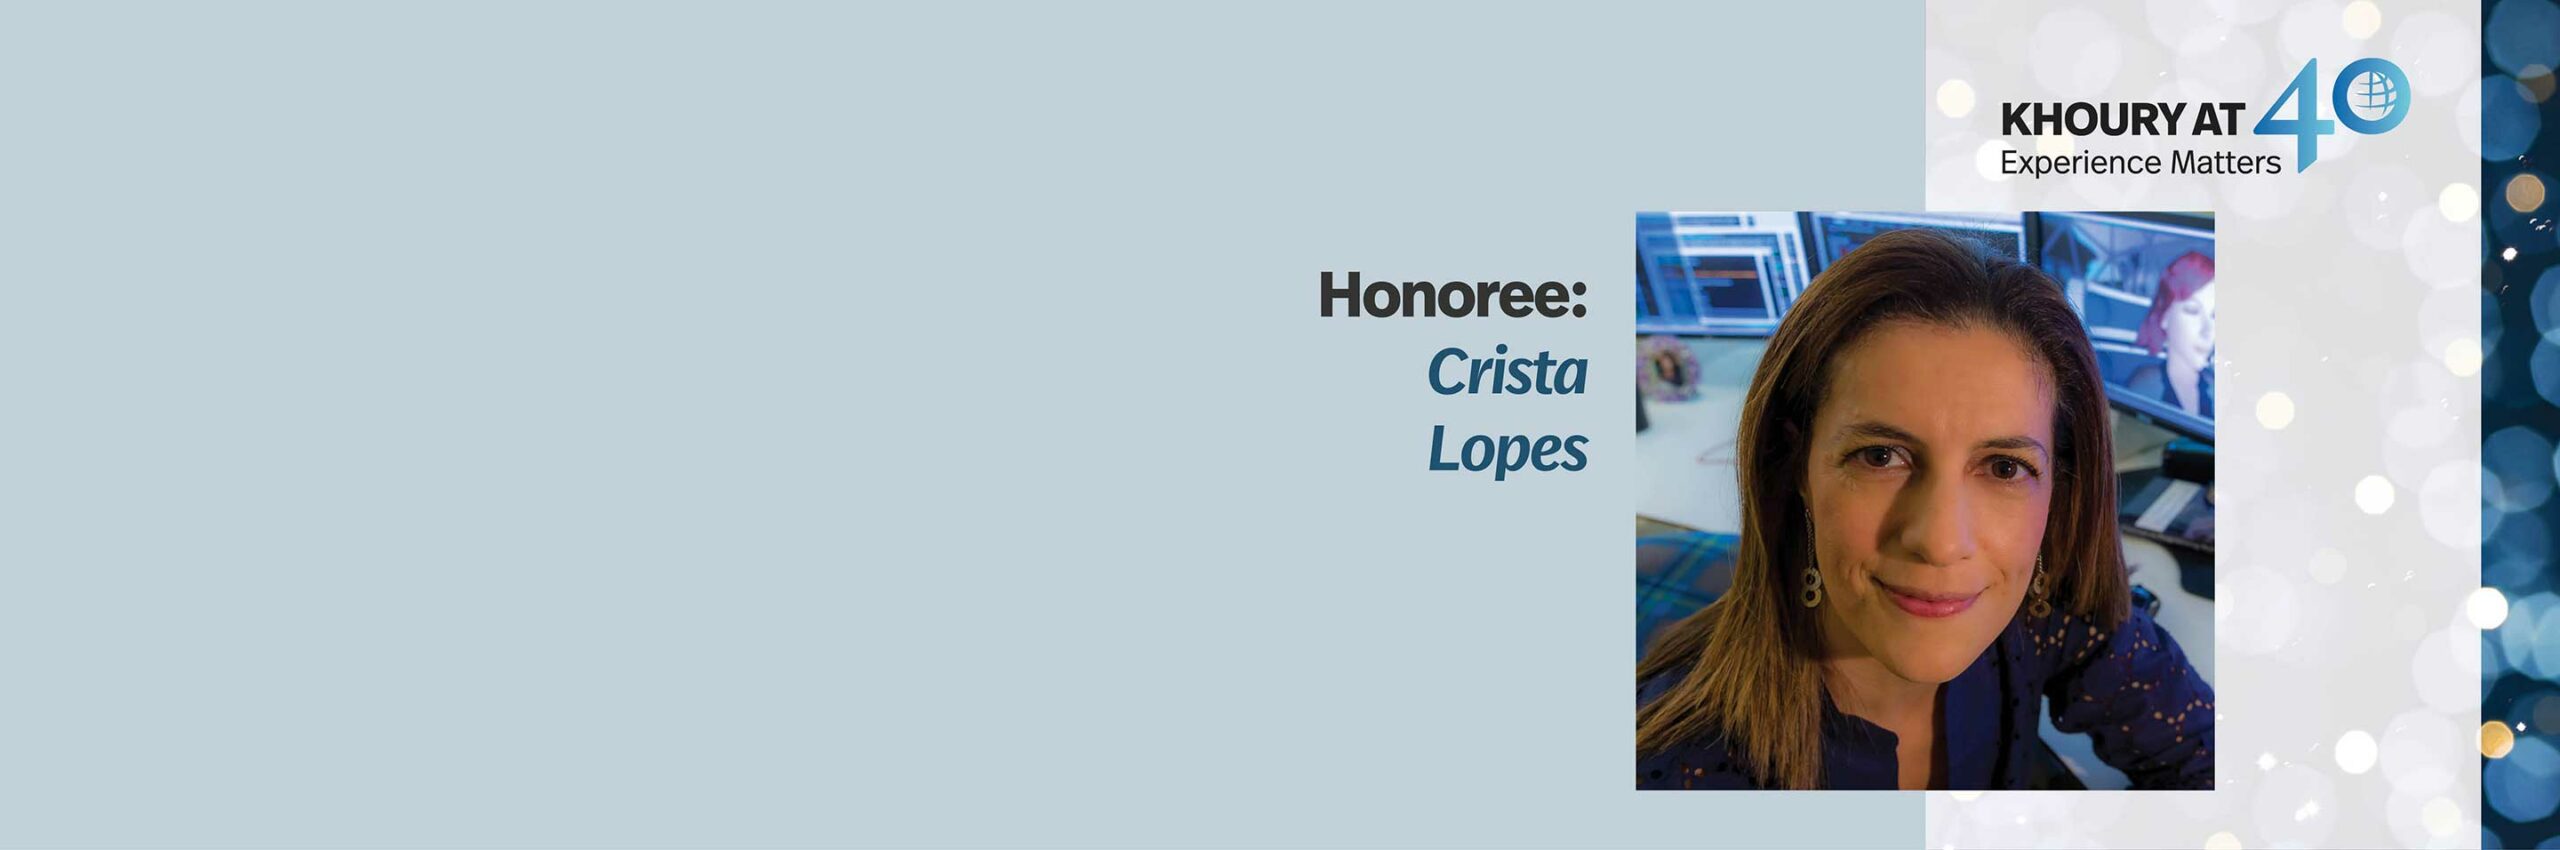 40 for 40 honoree: Crista Lopes